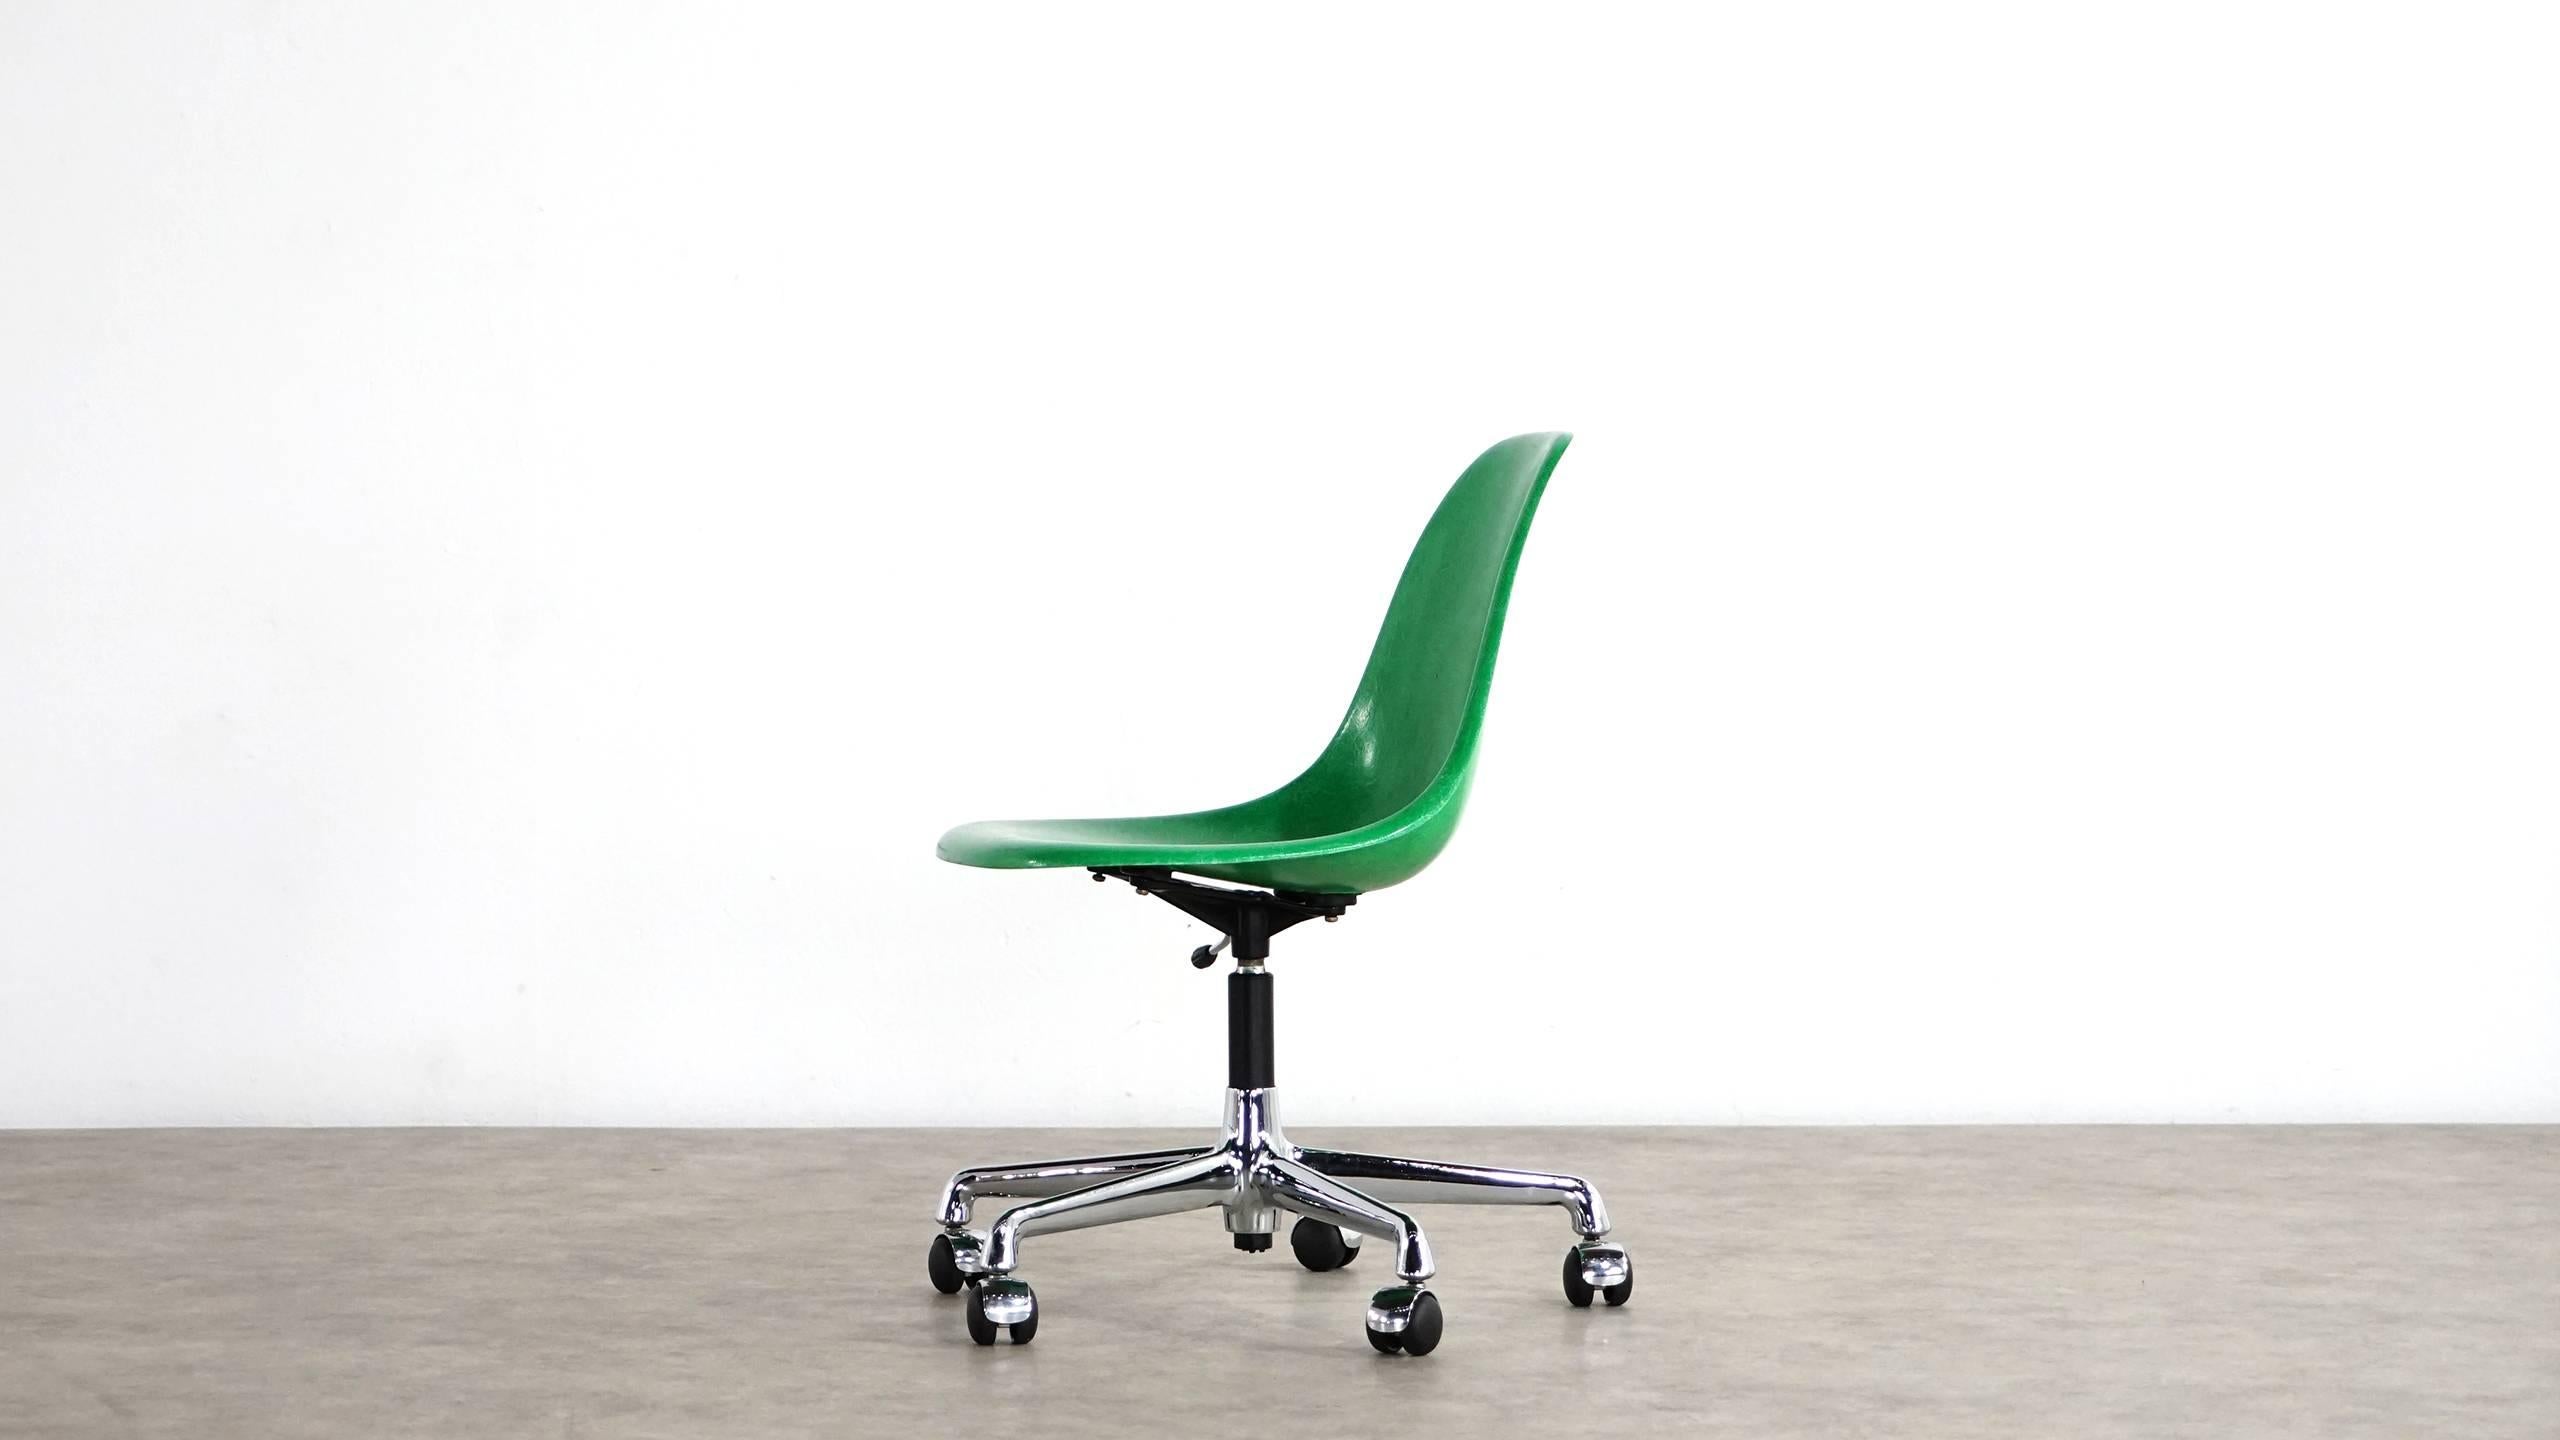 Rare office swivel chair by Charles Eames for Herman Miller, comes with a fantastic apple green fiberglass shell with stamped Herman Miller logo.

The height adjust allows working from 42cm to 56cm.

Very nice, original vintage condition.